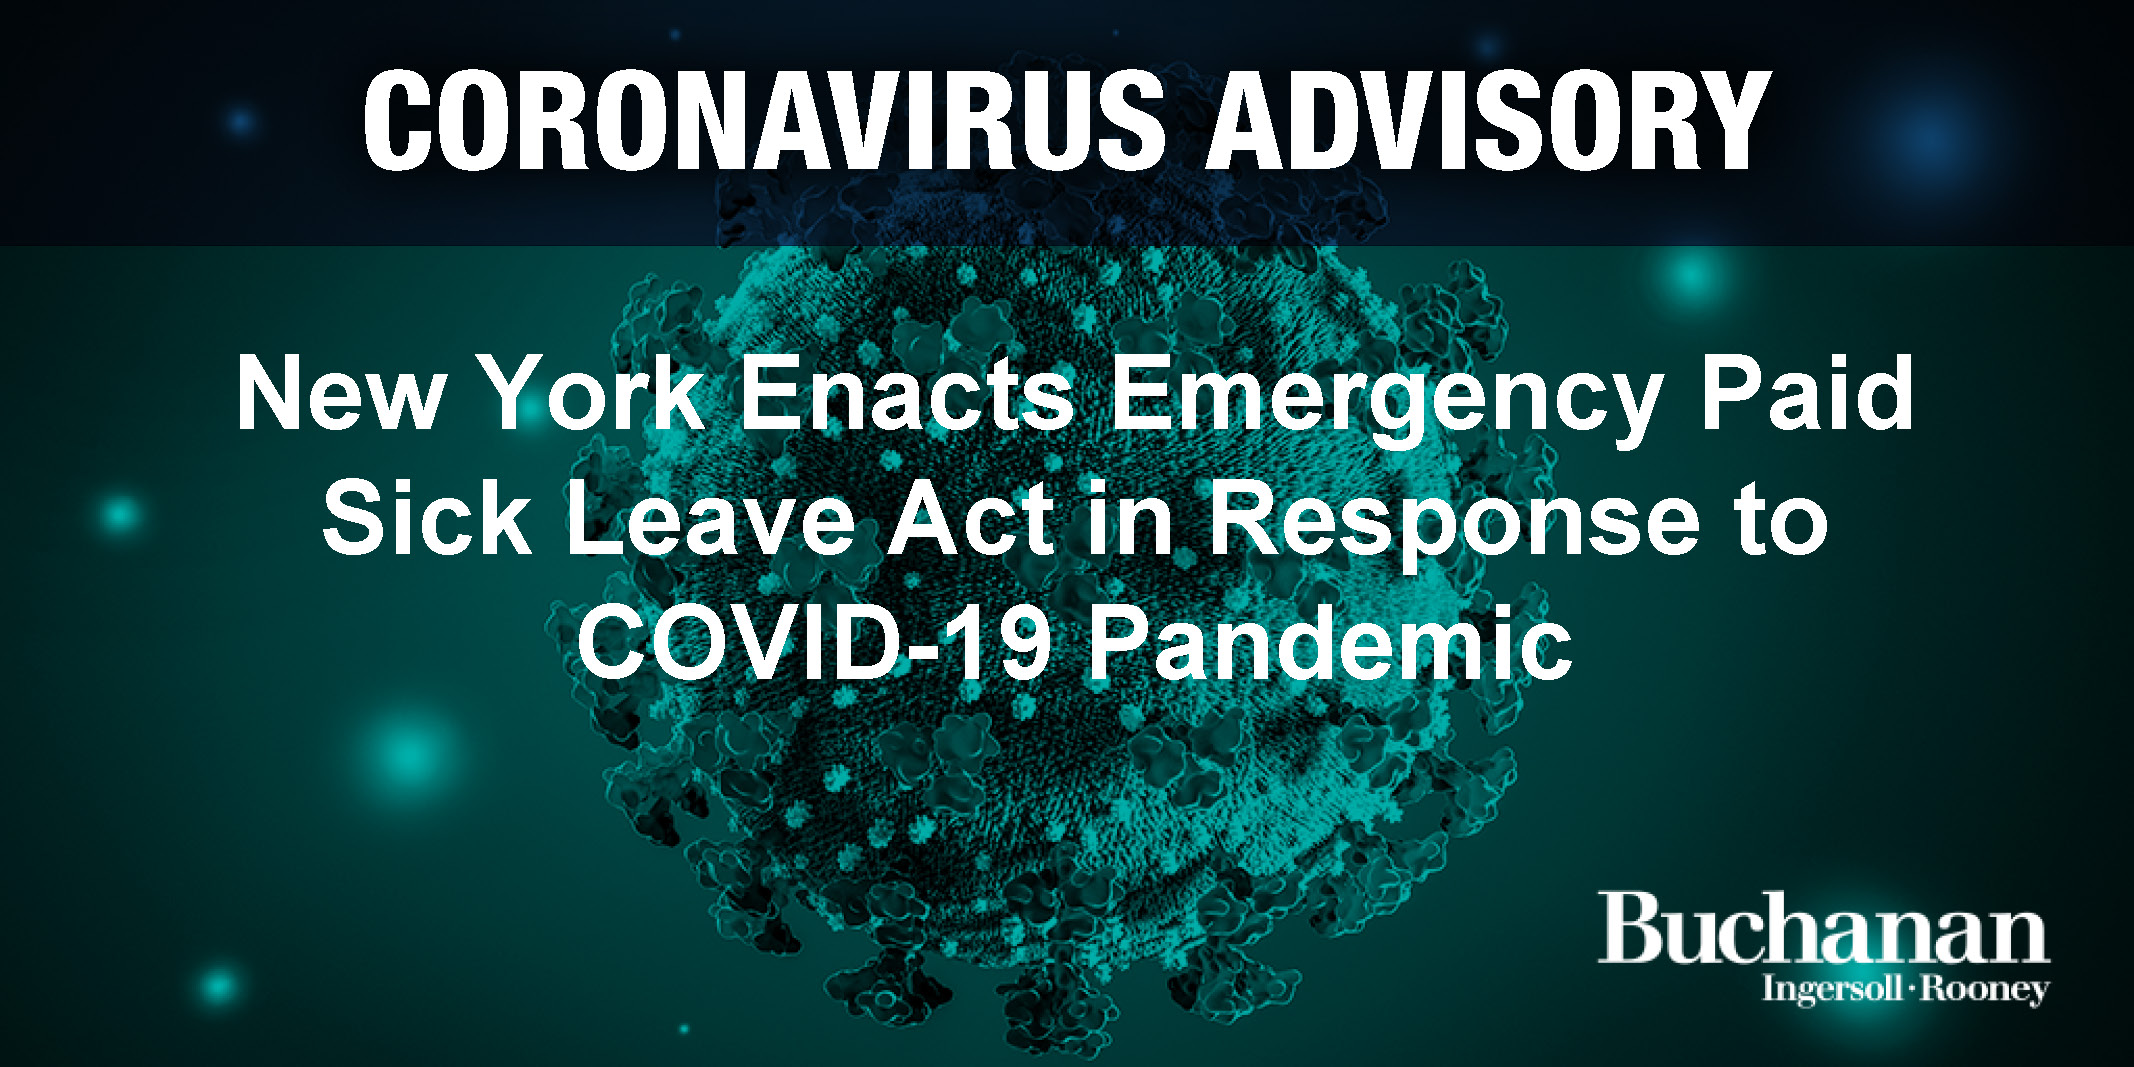 New York Enacts Emergency Paid Sick Leave Act in Response to COVID19